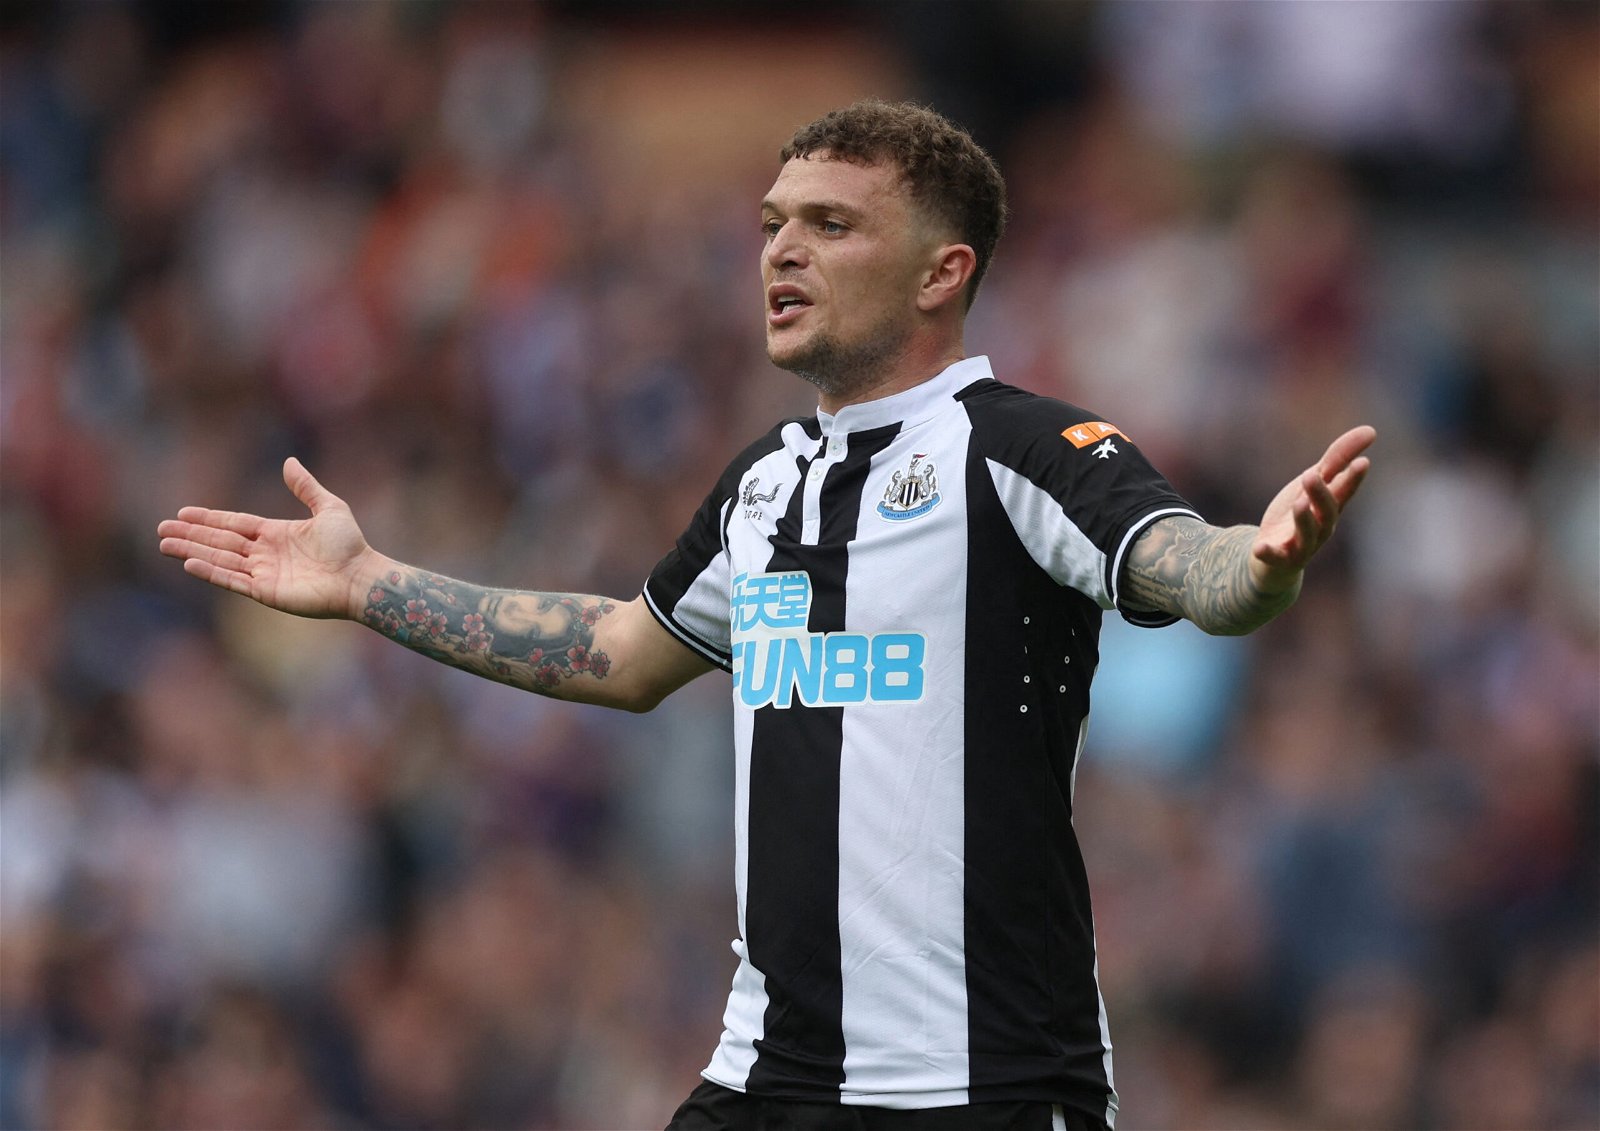 Newcastle United highest-paid player